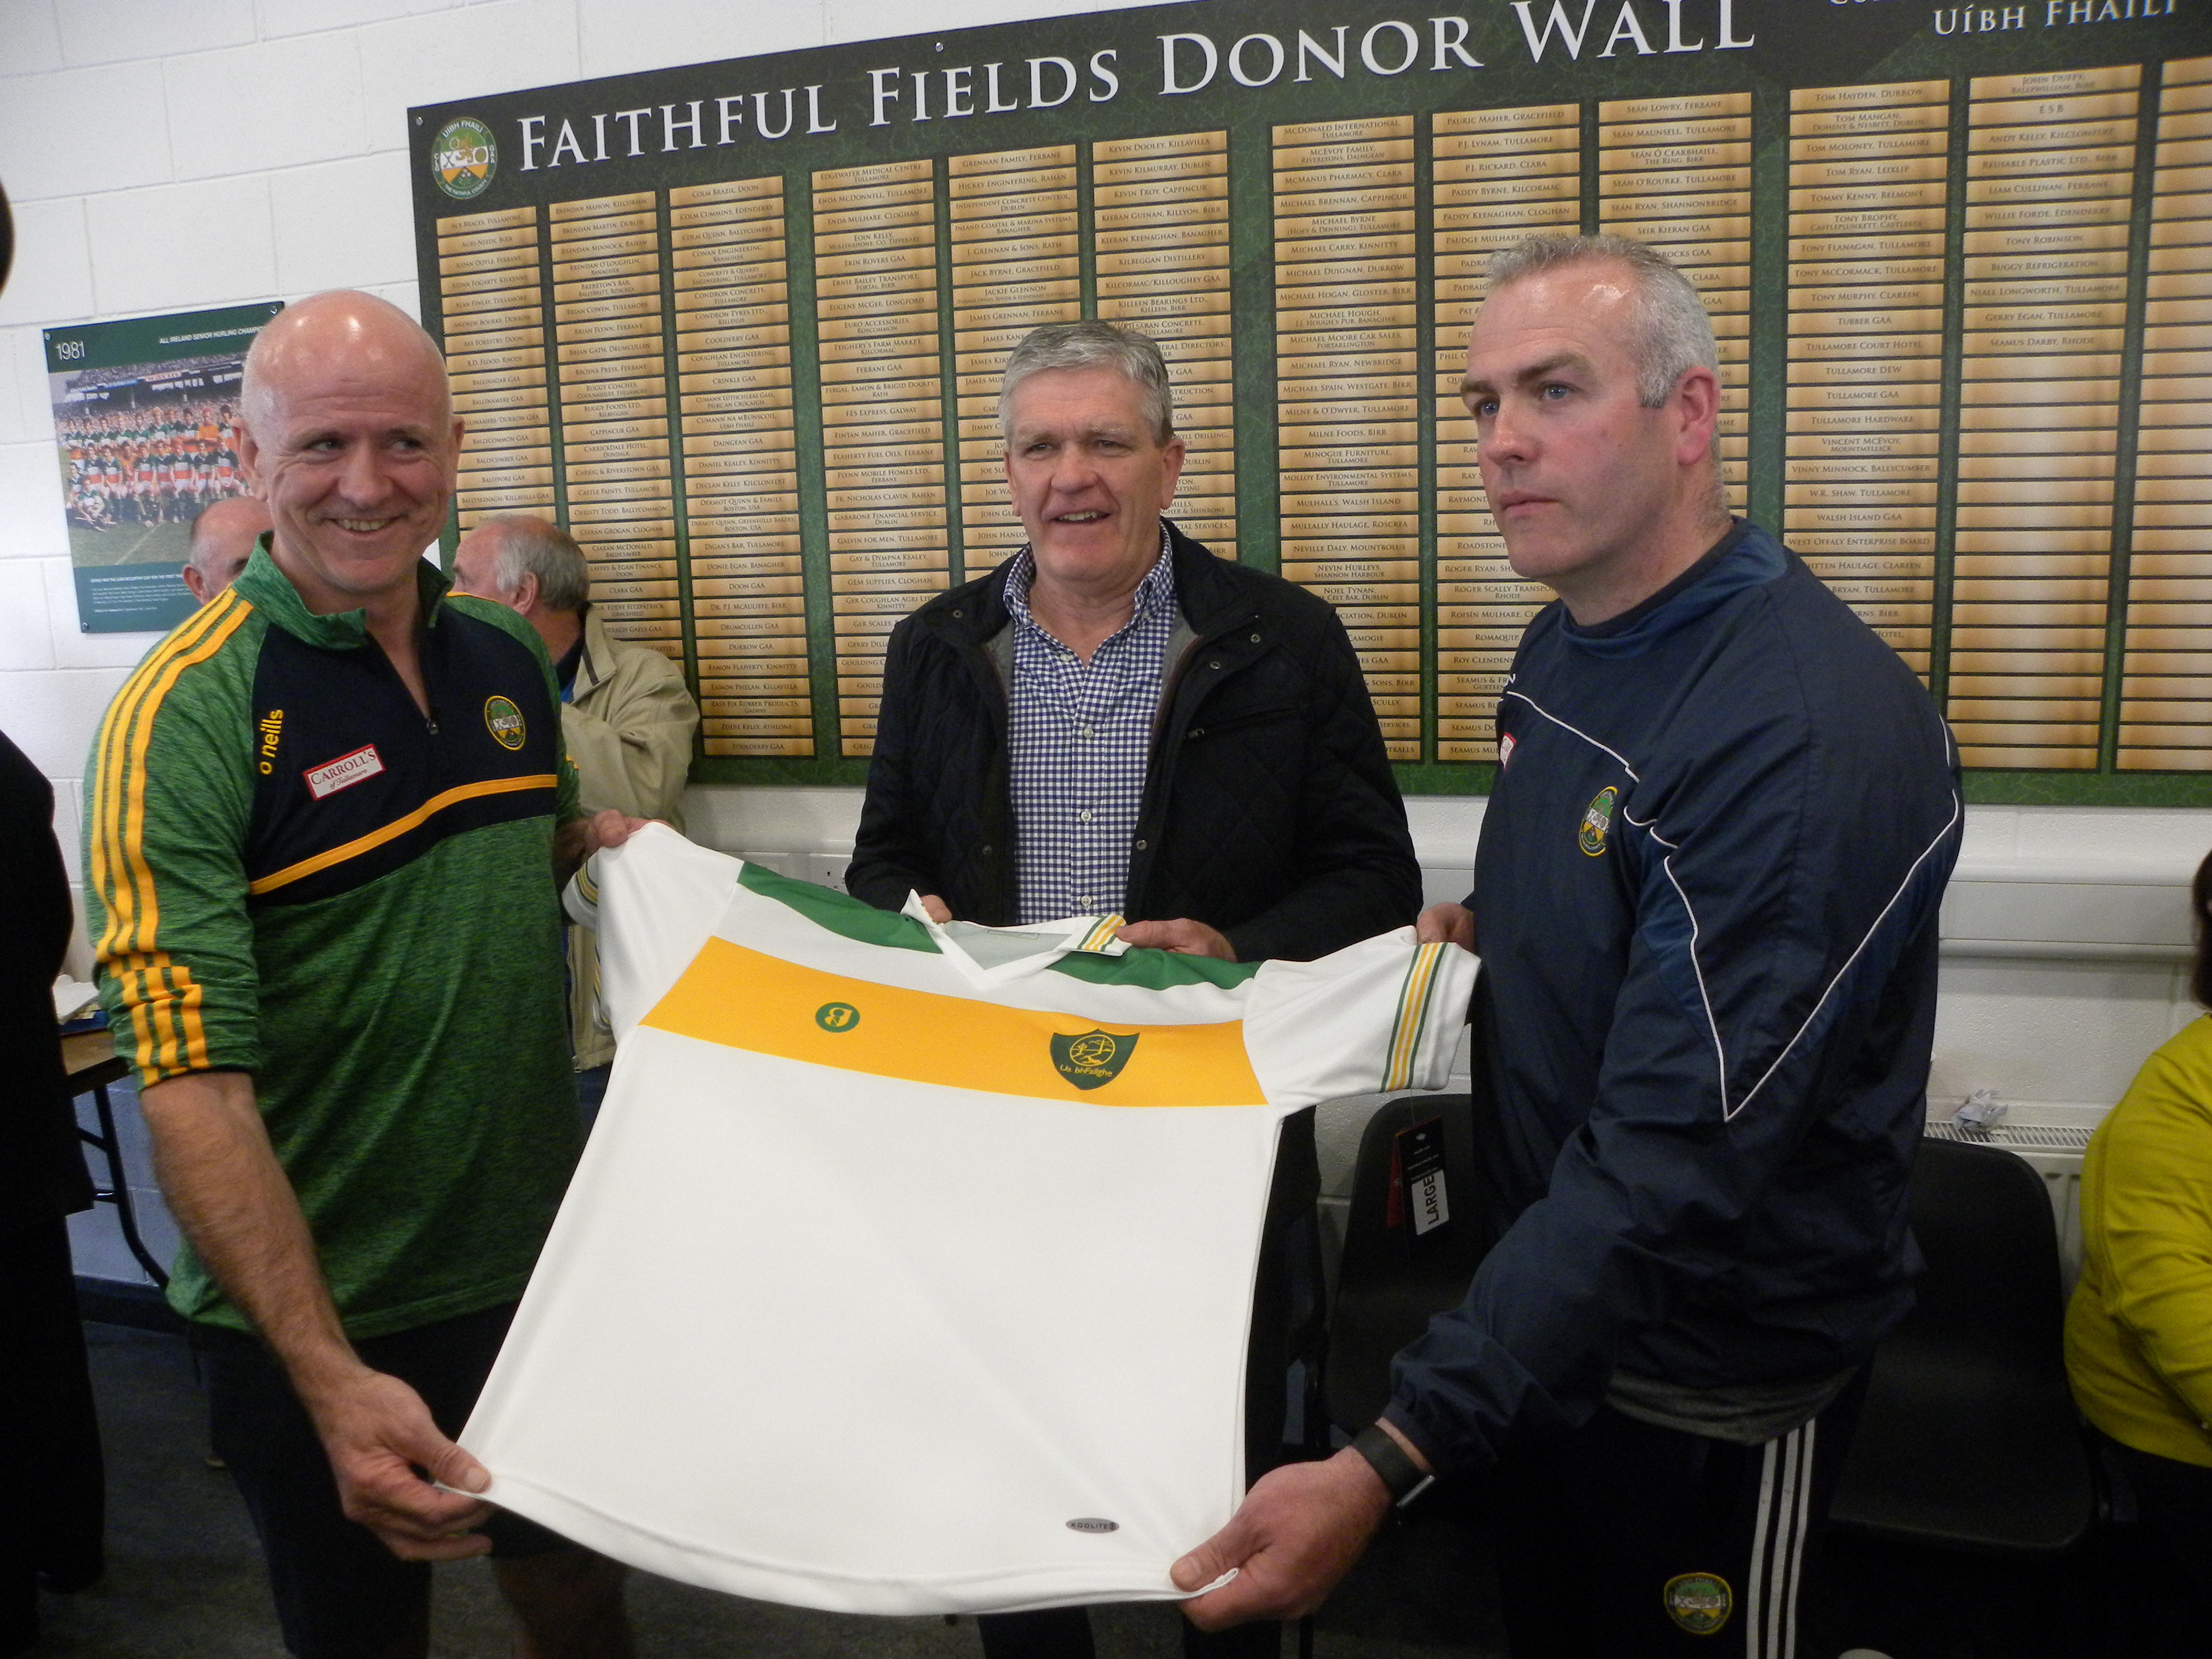 1982 “Replica” Jersey and Senior Football and Hurling Launch